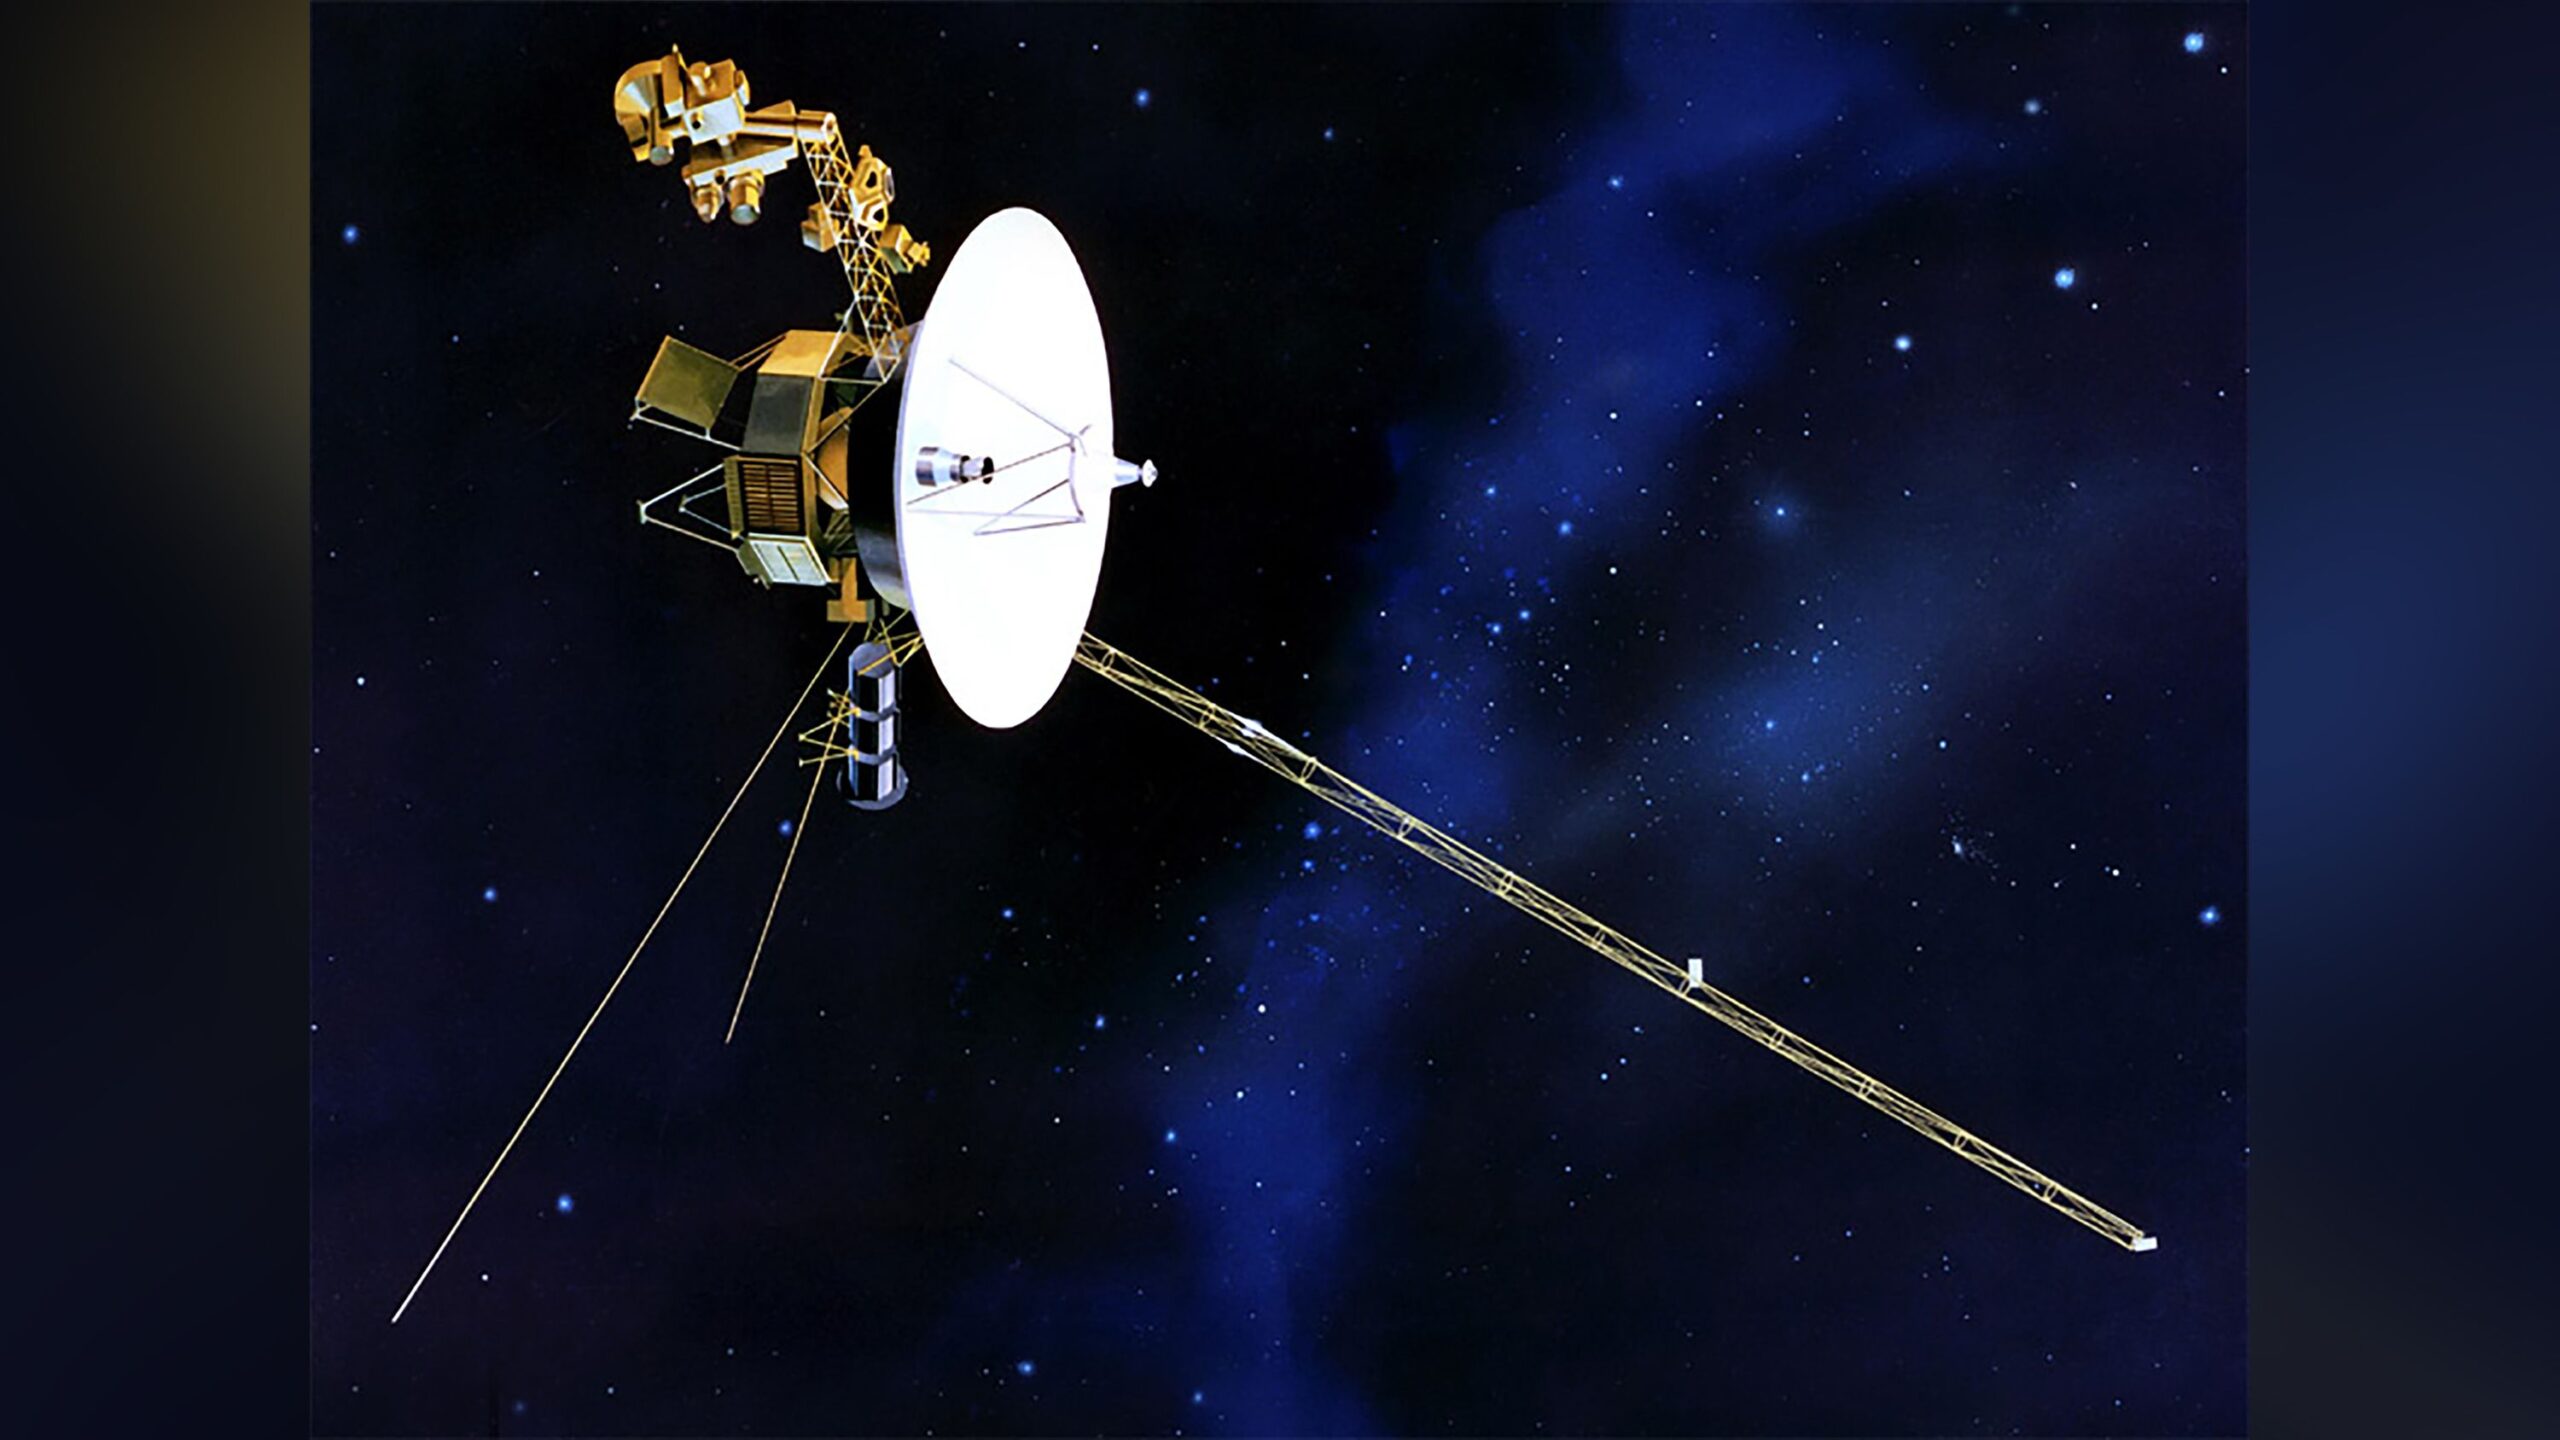 NASA’s Voyager 1 spacecraft has experienced a computer glitch that’s causing a bit of a communi...